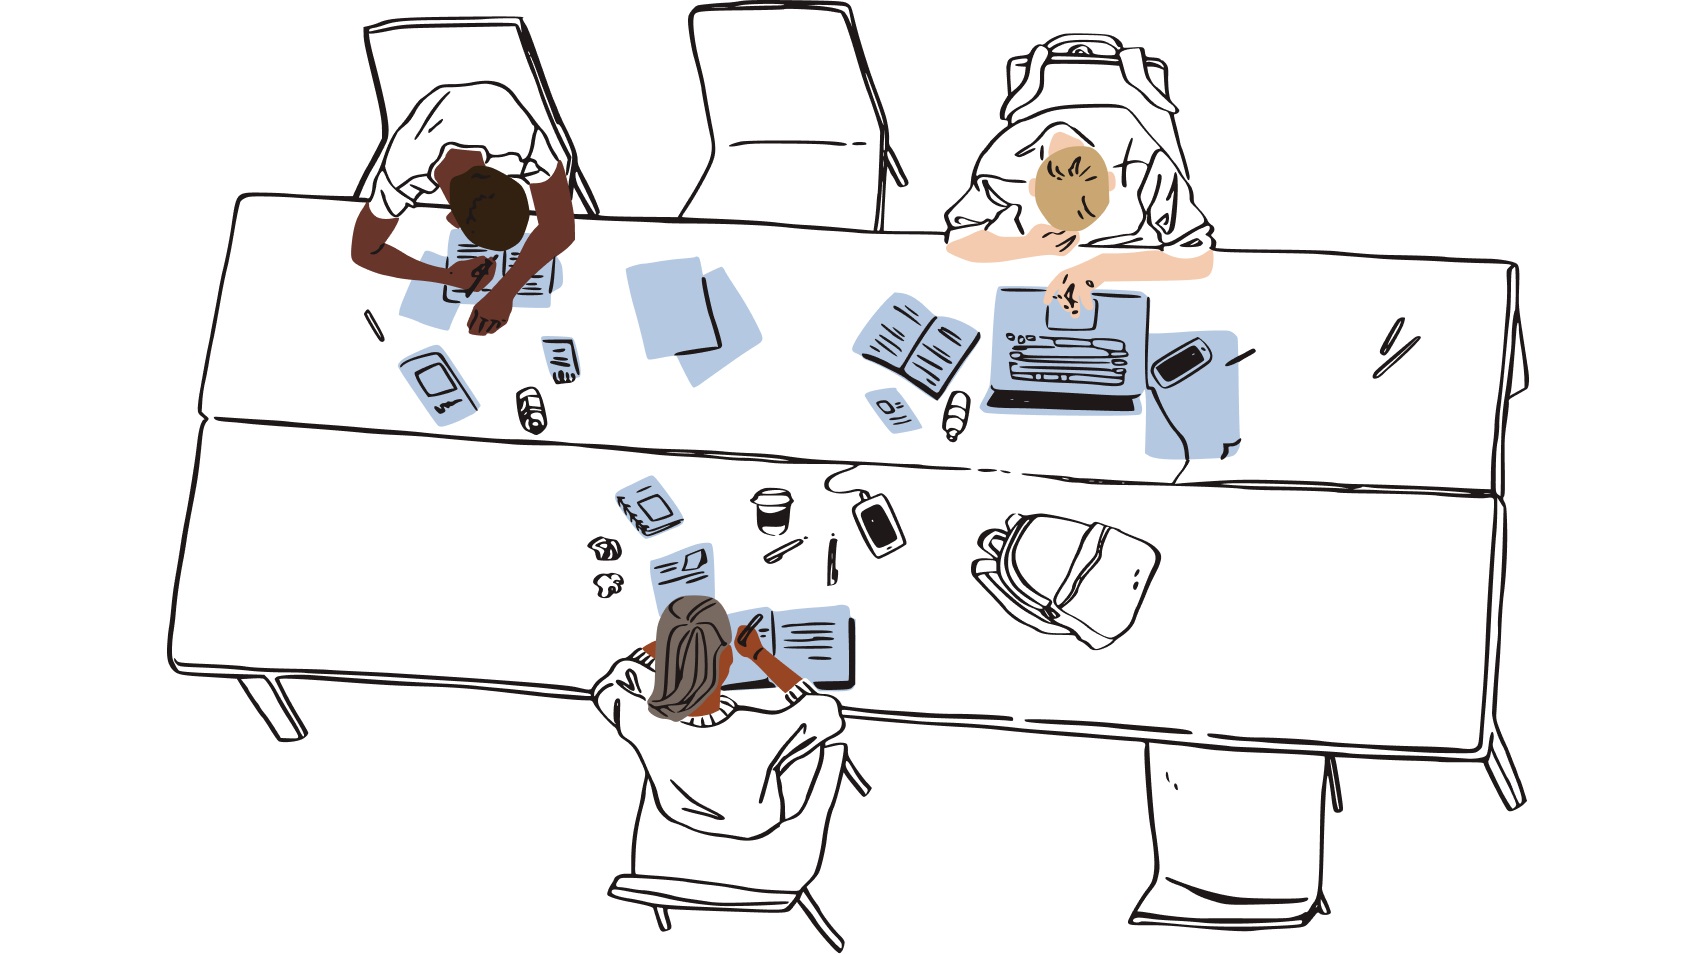 People working at a messy desk with multiple devices and many files surrounding them.